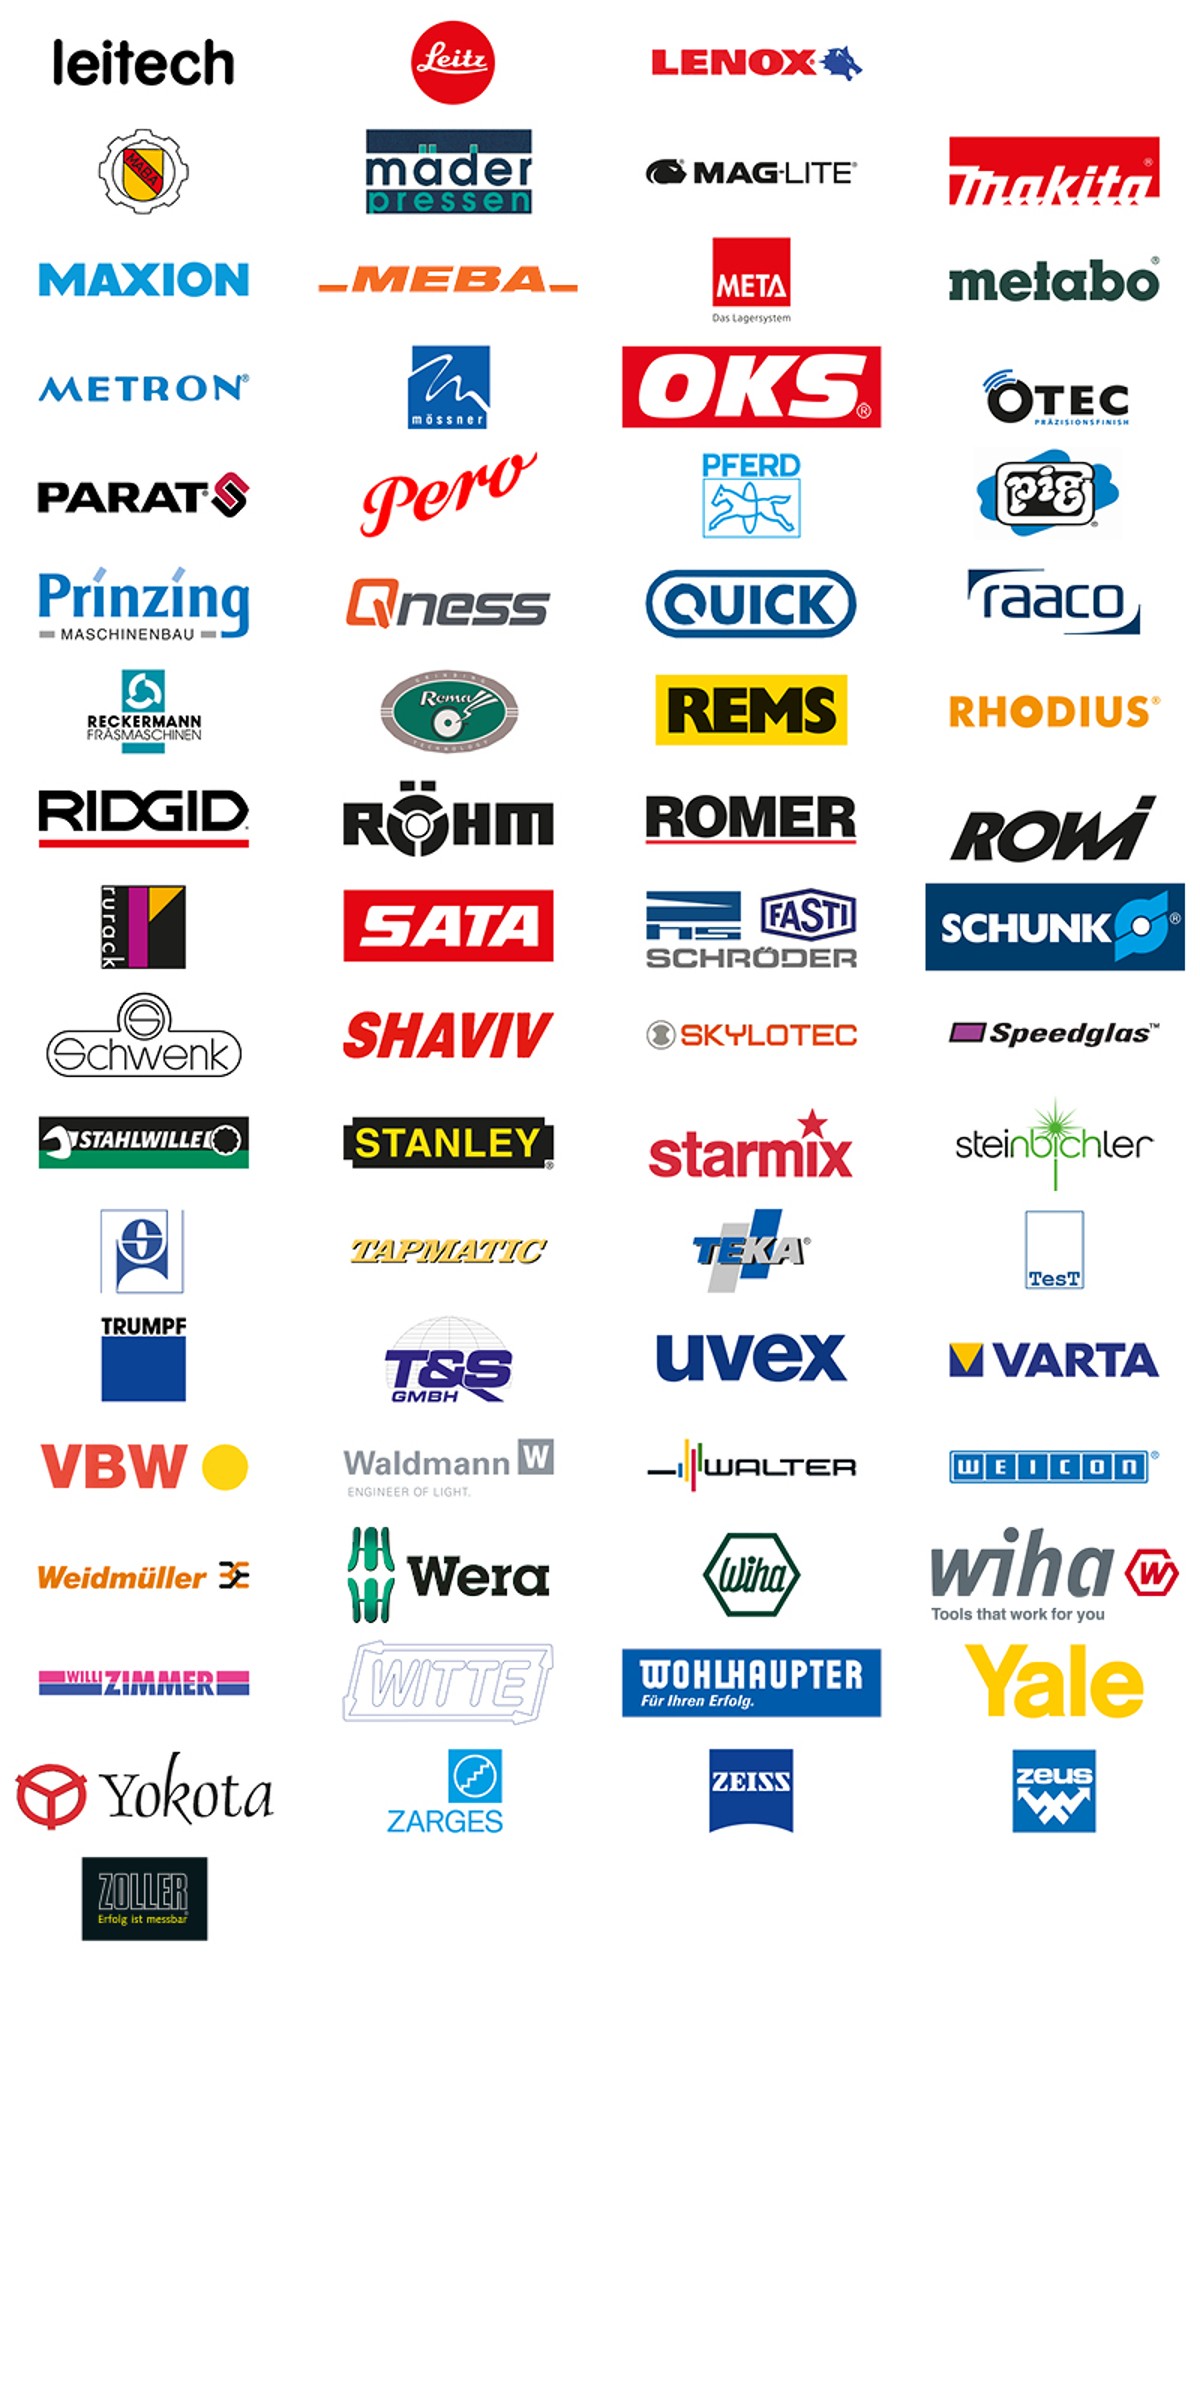 Supplier brands available from HAHN+KOLB